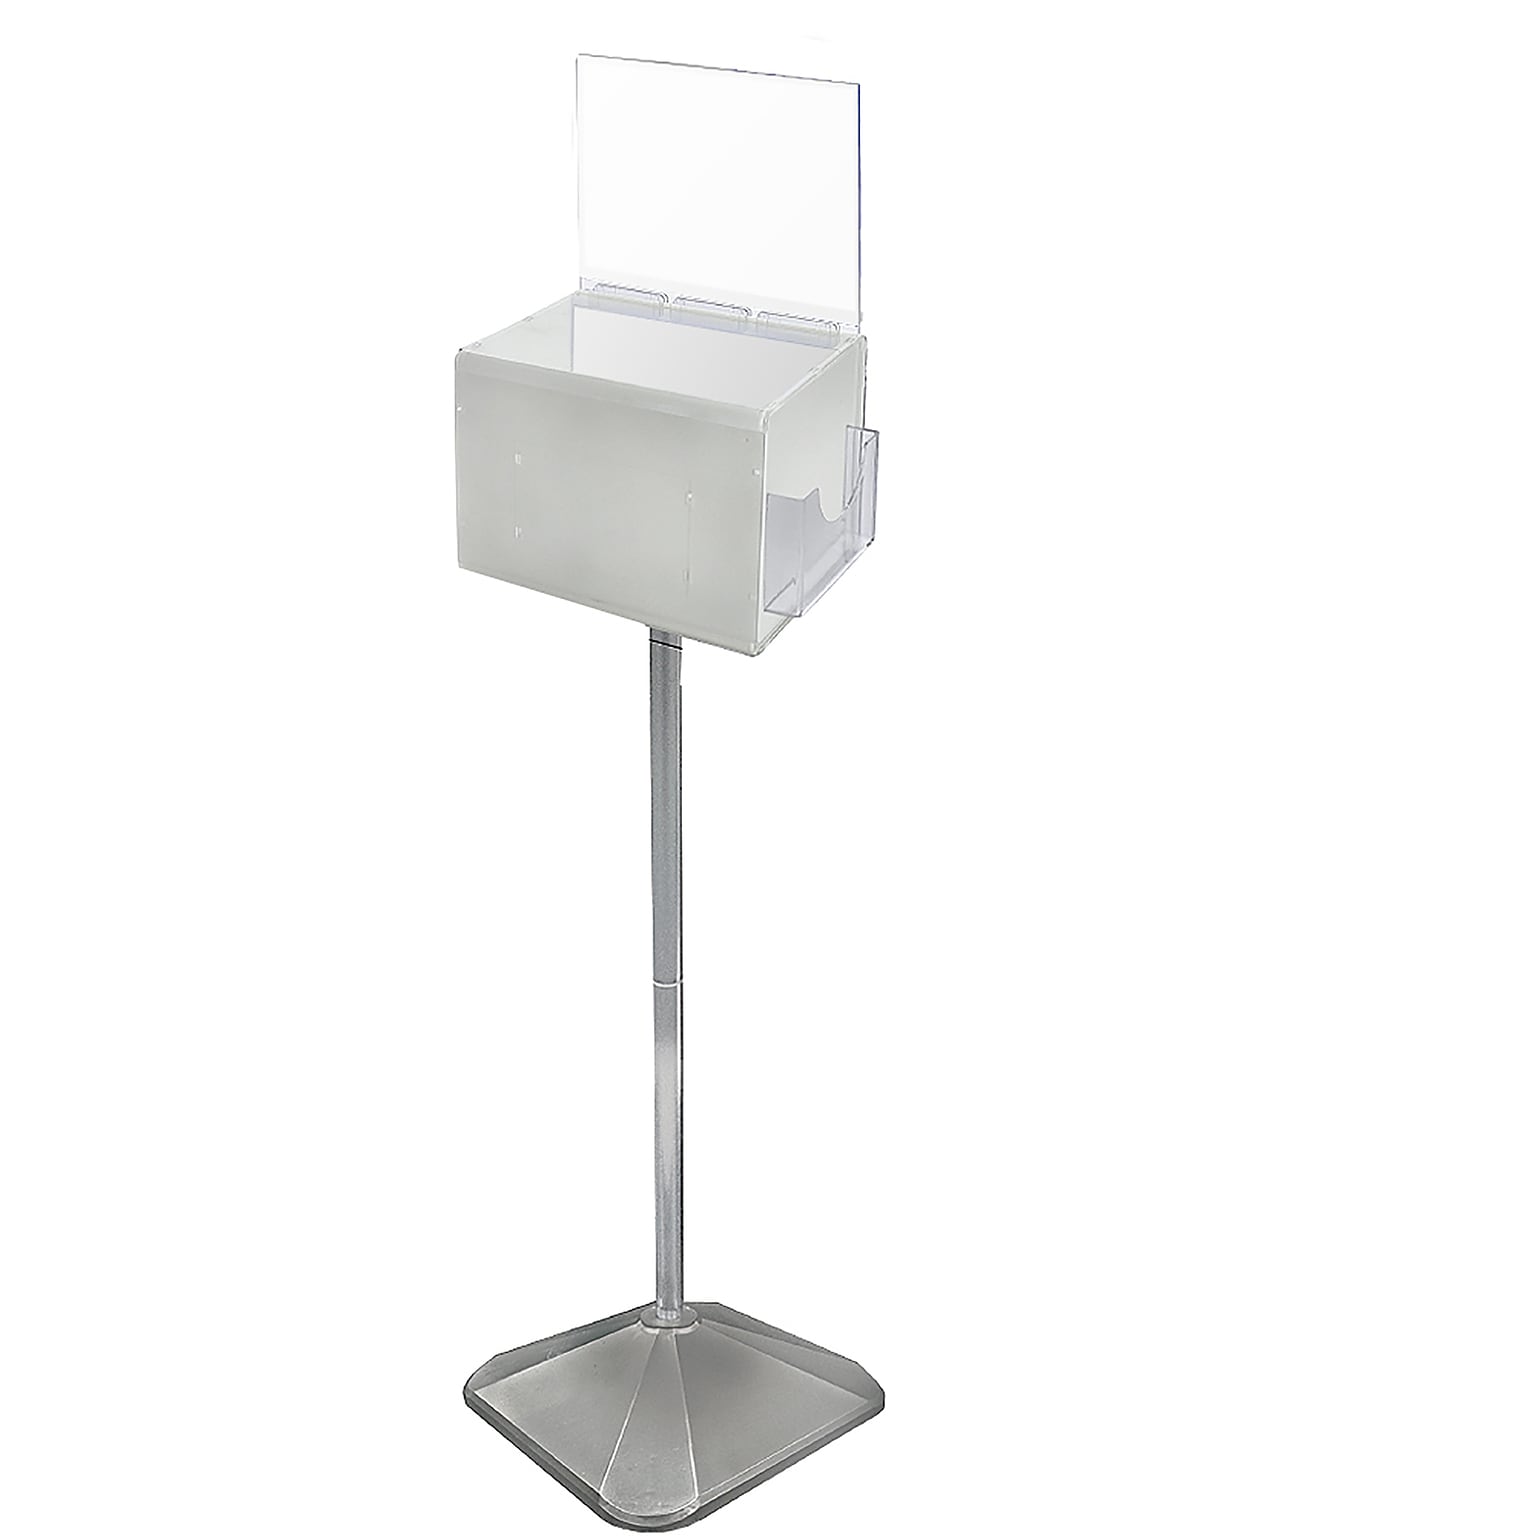 Azar® Extra Large White Suggestion Box With Pocket, 8 1/4(H) x 11(W) x 8 1/4(D)